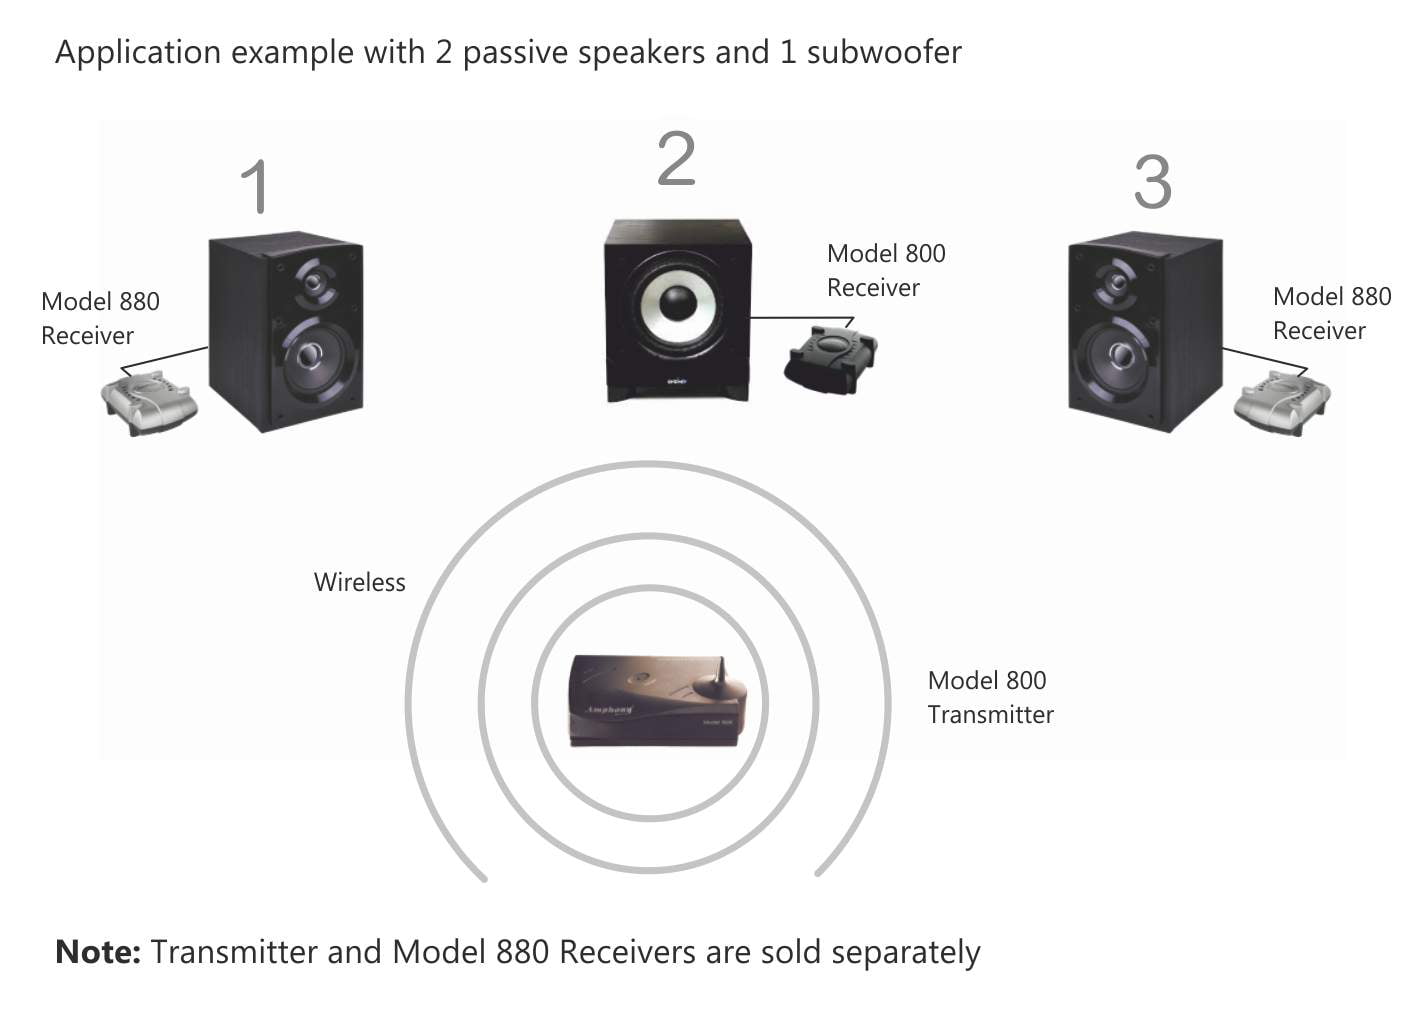 Compatible with Model 800 Transmitter Multichannel Wireless Receiver for making Subwoofers Wireless Model 800 Connects to any Subwoofer and active Speaker Better-than Bluetooth Digital Wireless